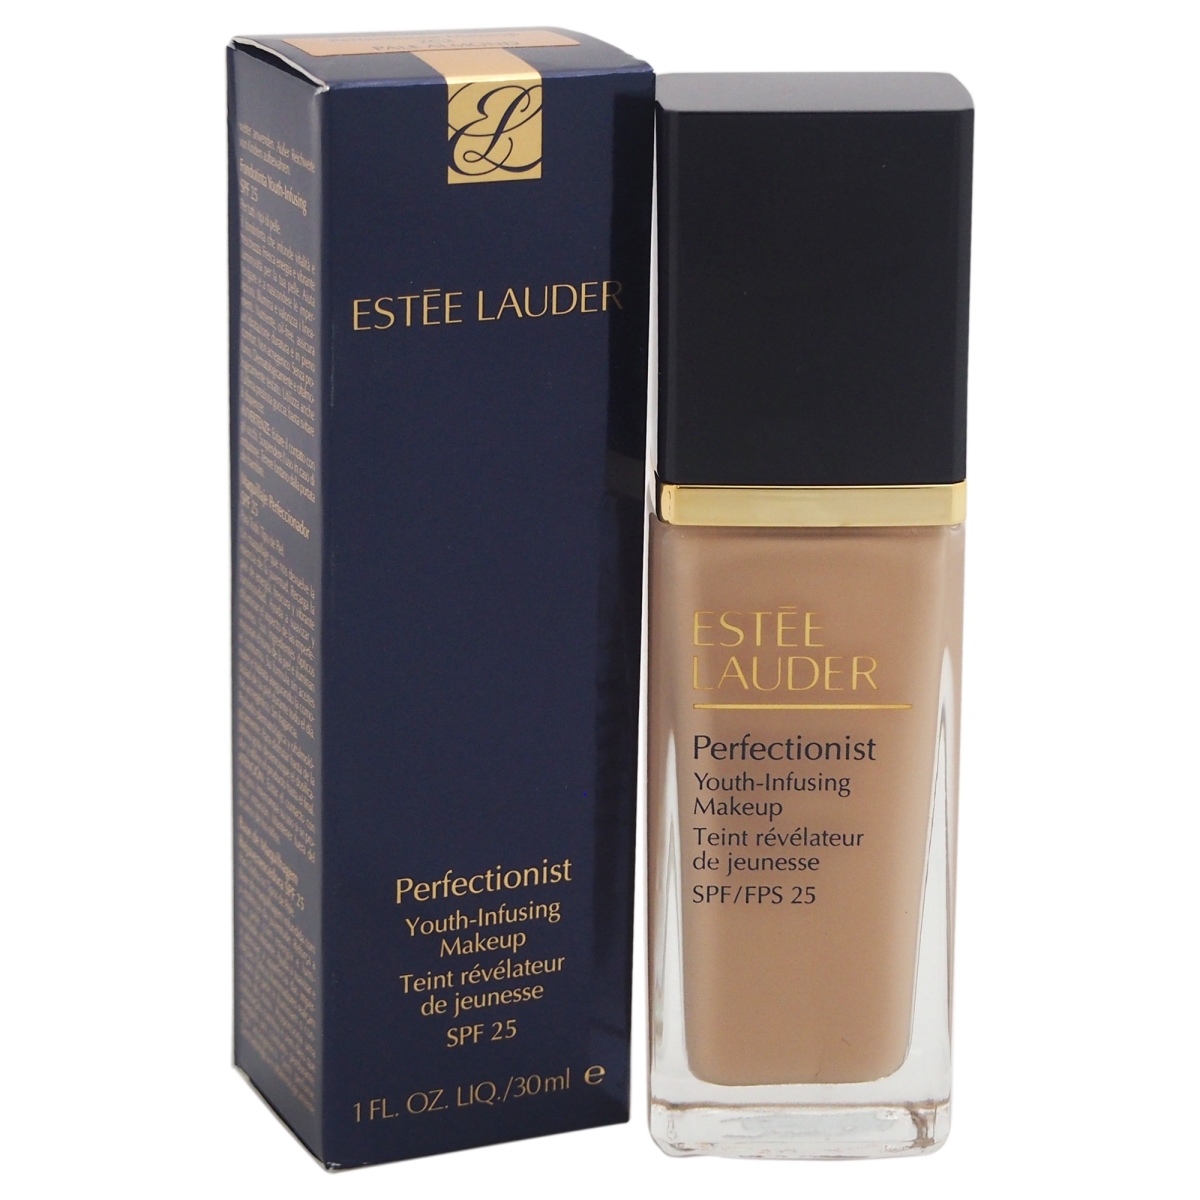 W-c-9559 1 Oz No. 2c2 Spf 25 Perfectionist Youth-infusing Pale Almond Makeup For Women